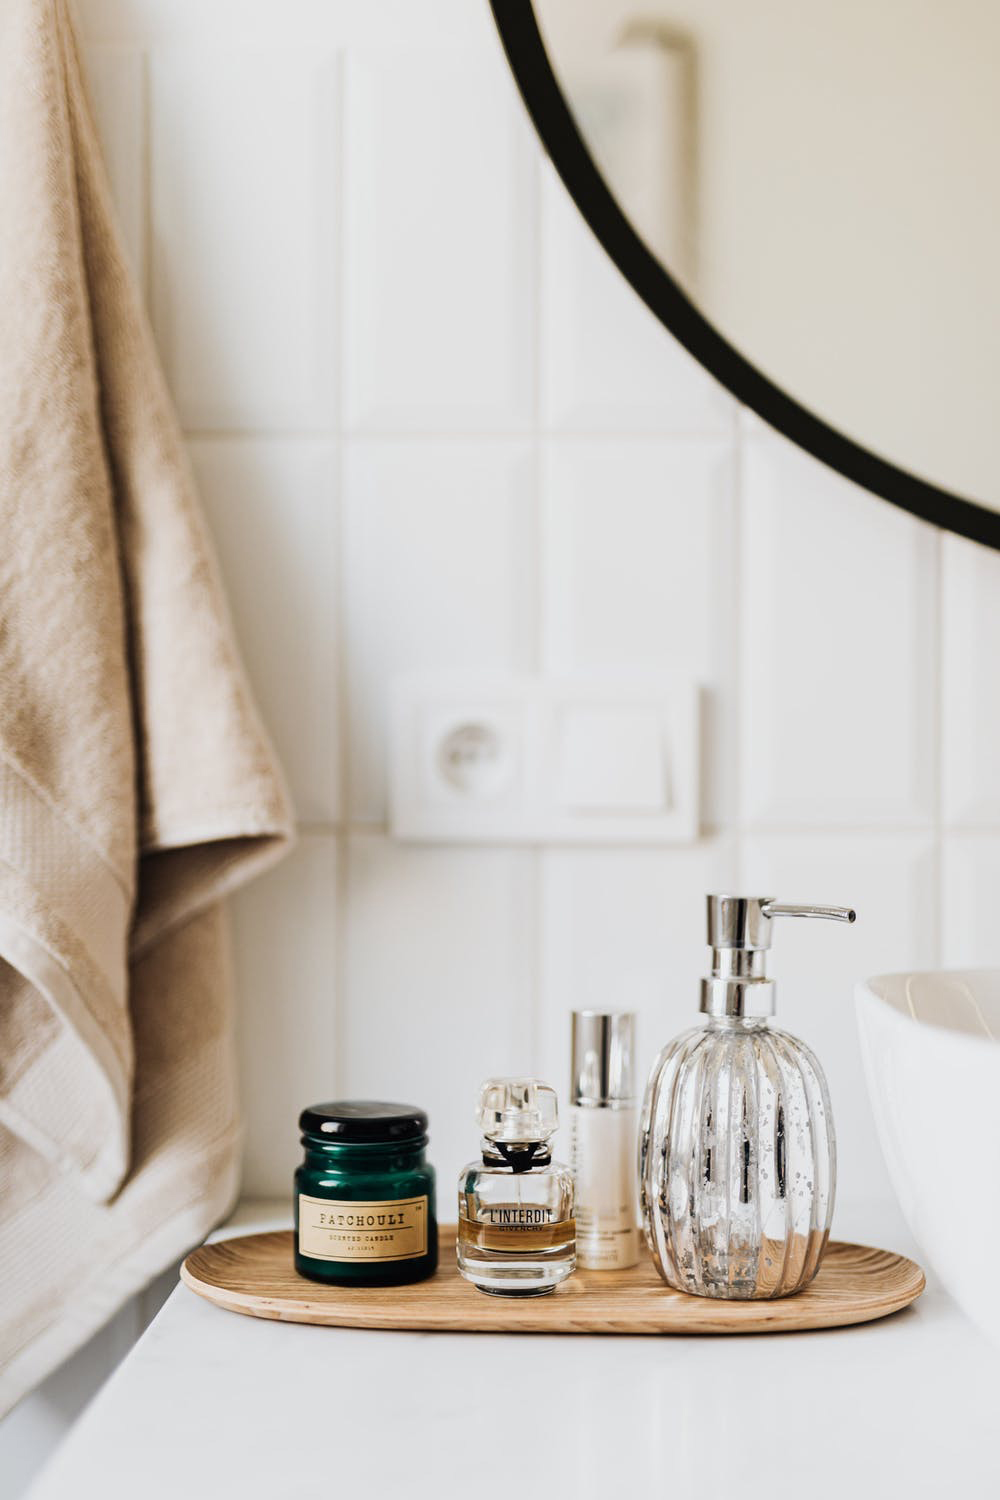 Why our family said goodbye to synthetic fragrances and the harm they cause. Find out more over on KaraLayne.com! #SyntheticFragrance #SyntheticFragranceDangers #ToxicProductsInHome #CleanLiving #CleanLivingLifestyle #EssentialOils